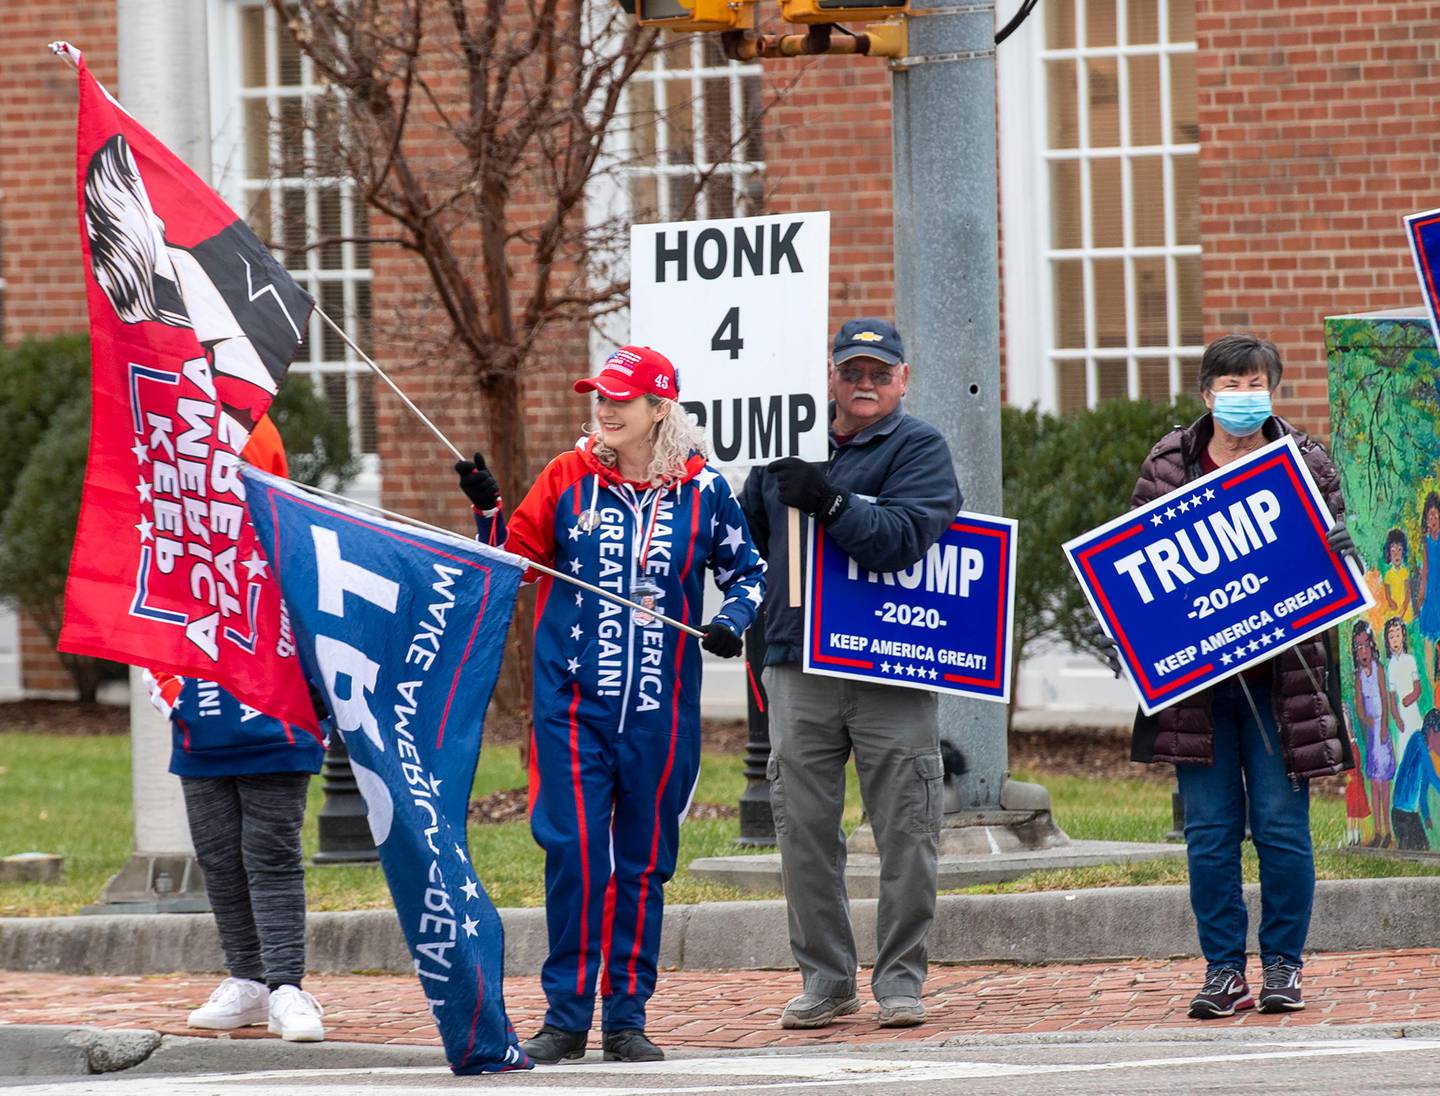 Members of the Southwest Virginia Tea Party gathered in Abingdon, Va., Wednesday afternoon, Jan. 6, 2020, to show their support for President Donald Trump and join the "Stop the Steal" movement. About 50 supporters of the President gathered on the four corners of Main Street and Cummings Avenue to show their support. (David Crigger/Bristol Herald Courier via AP)